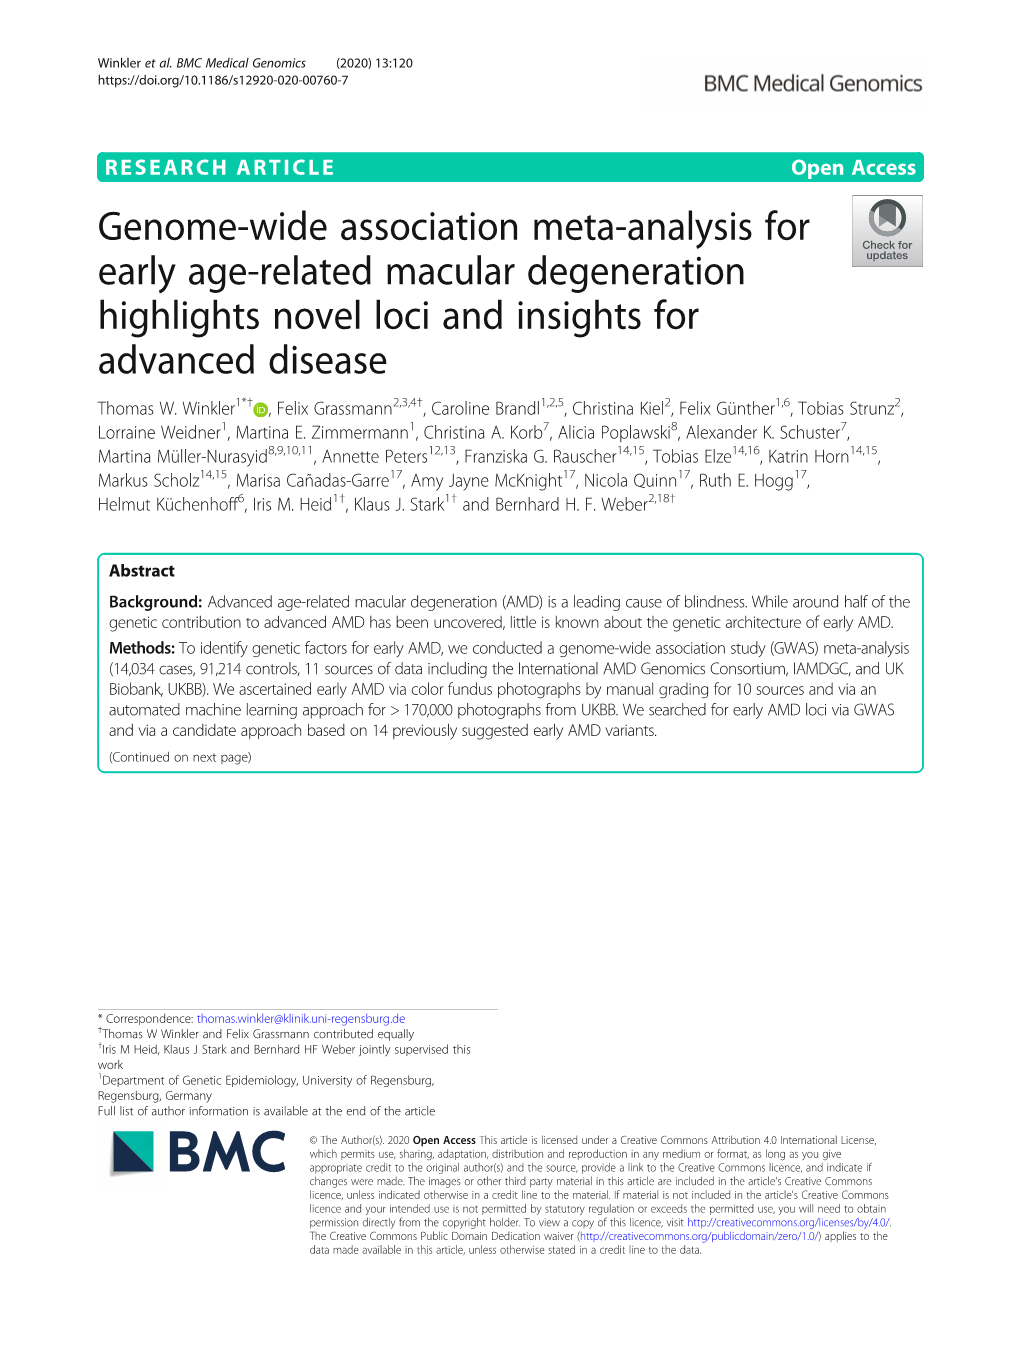 Genome-Wide Association Meta-Analysis for Early Age-Related Macular Degeneration Highlights Novel Loci and Insights for Advanced Disease Thomas W